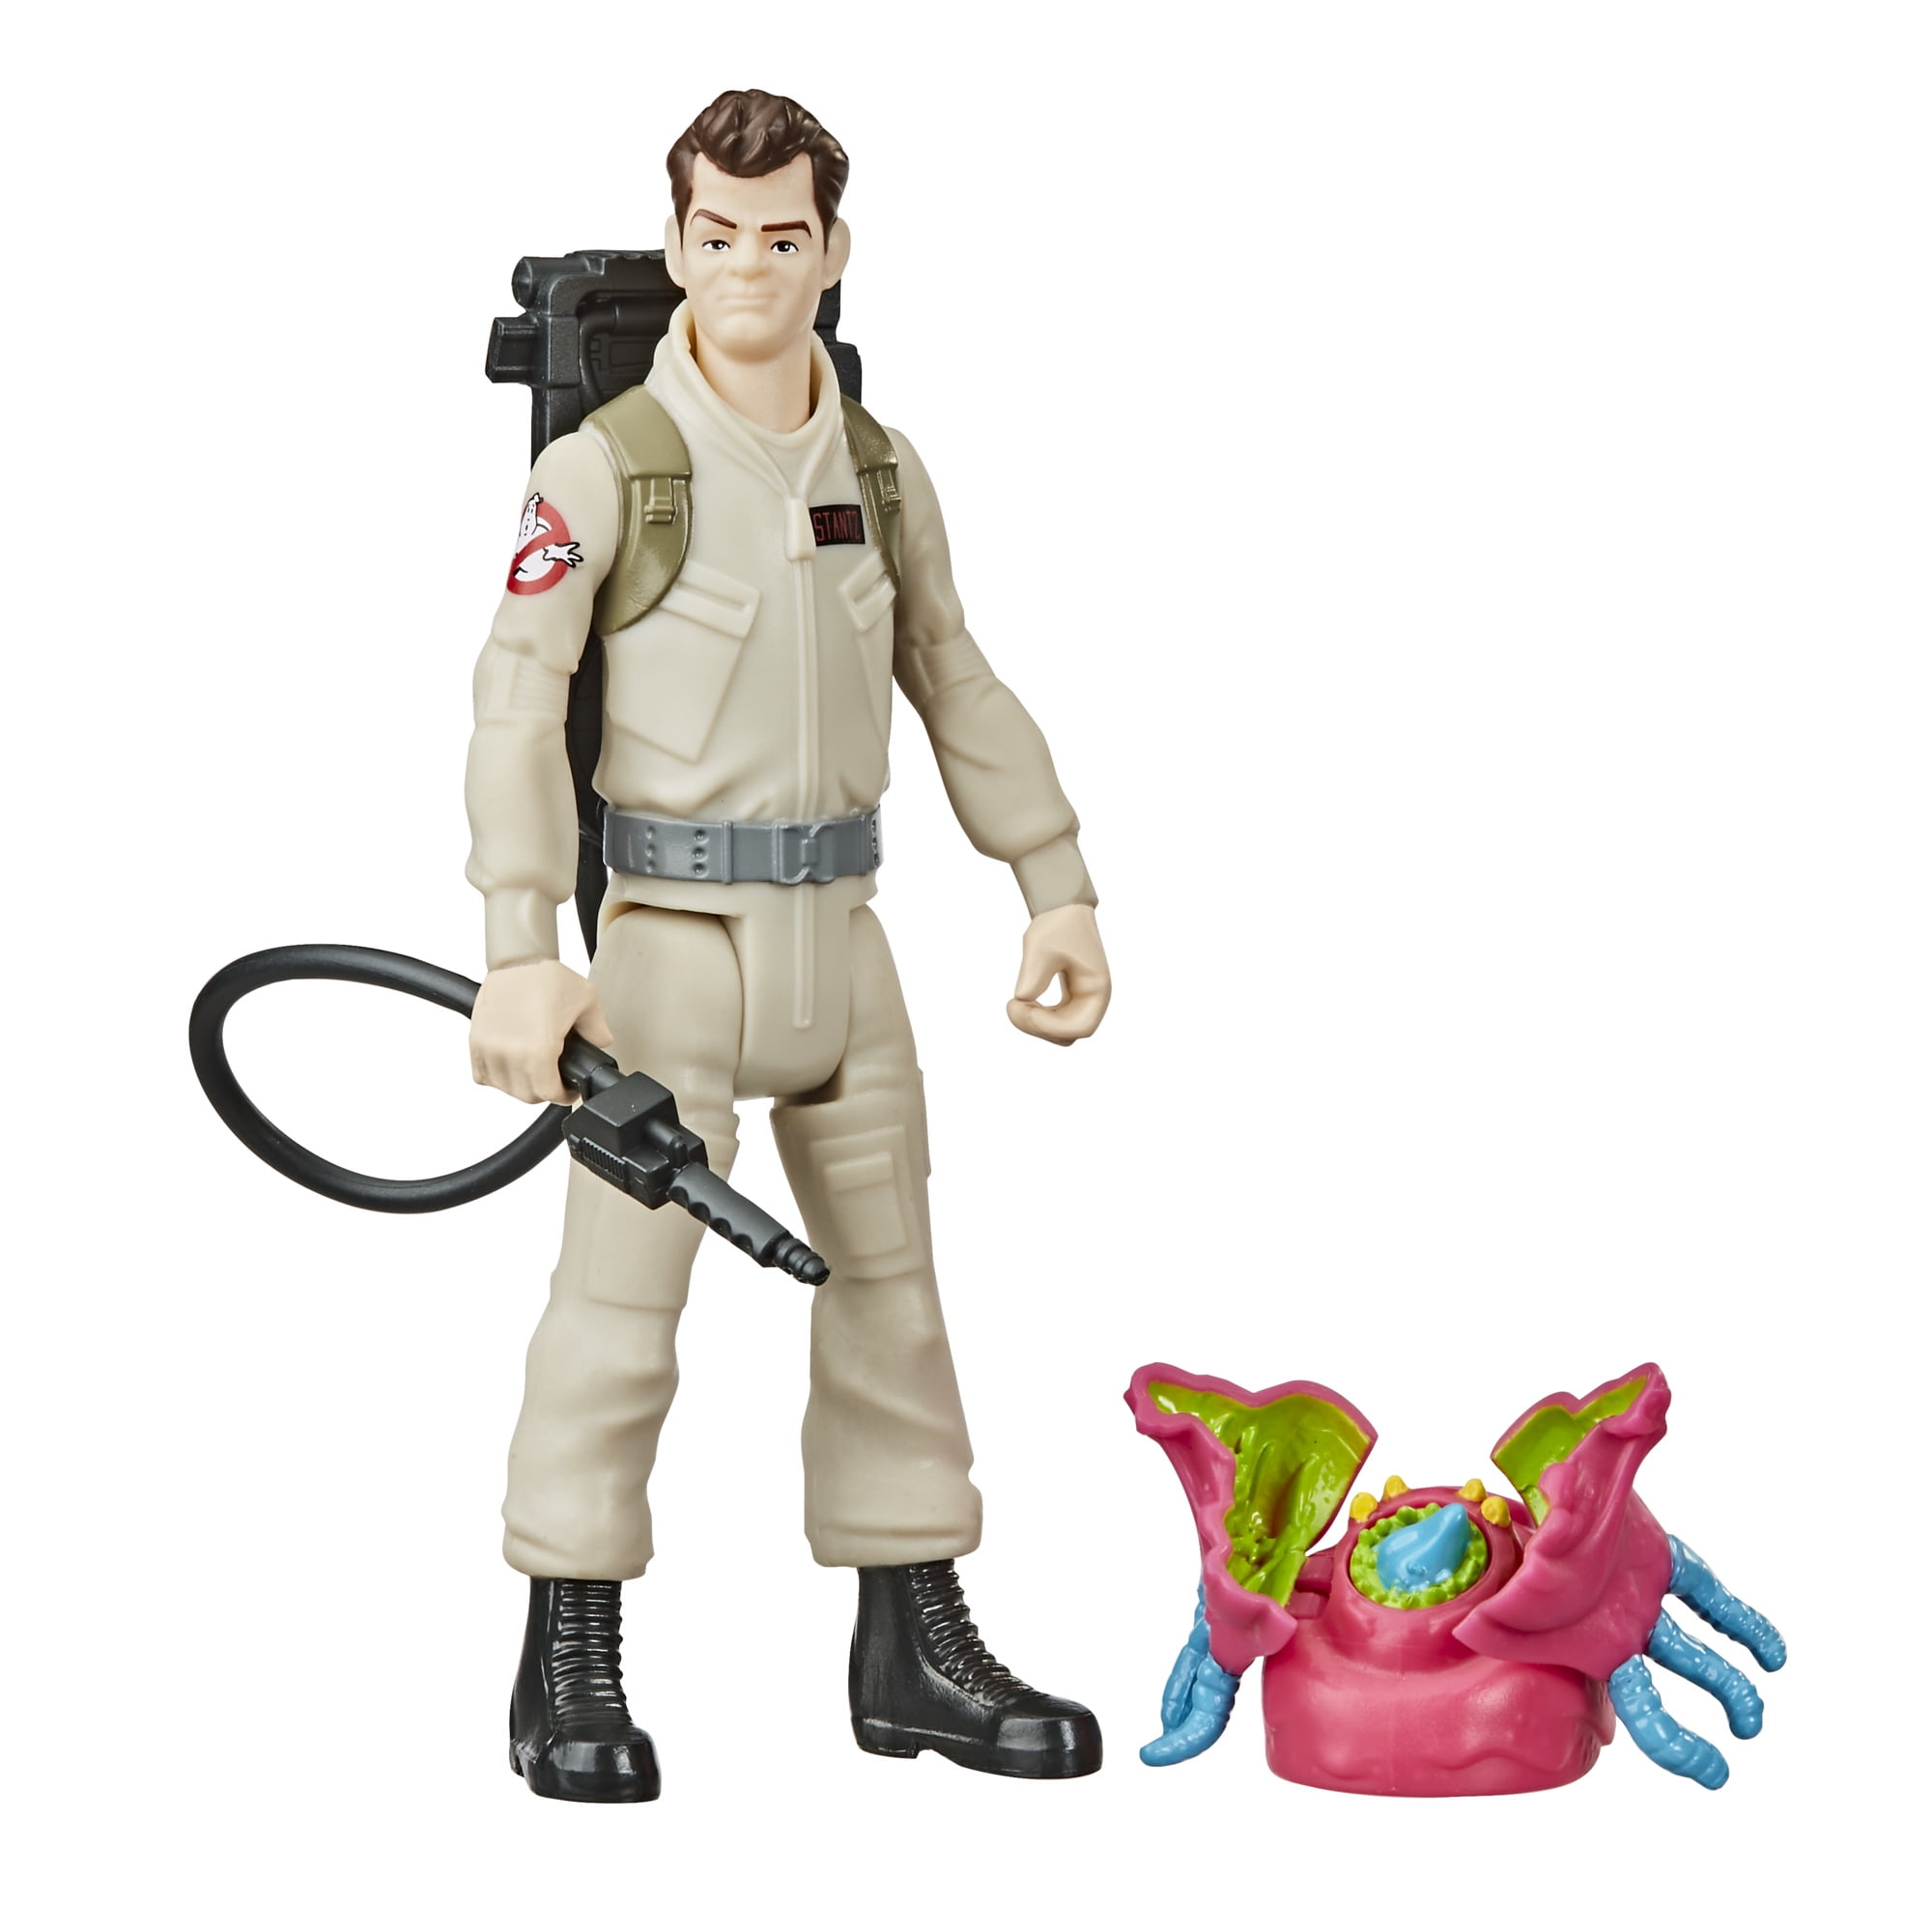 The Real Ghostbusters Kenner 2020 Walmart 4 Figure Set for sale online 